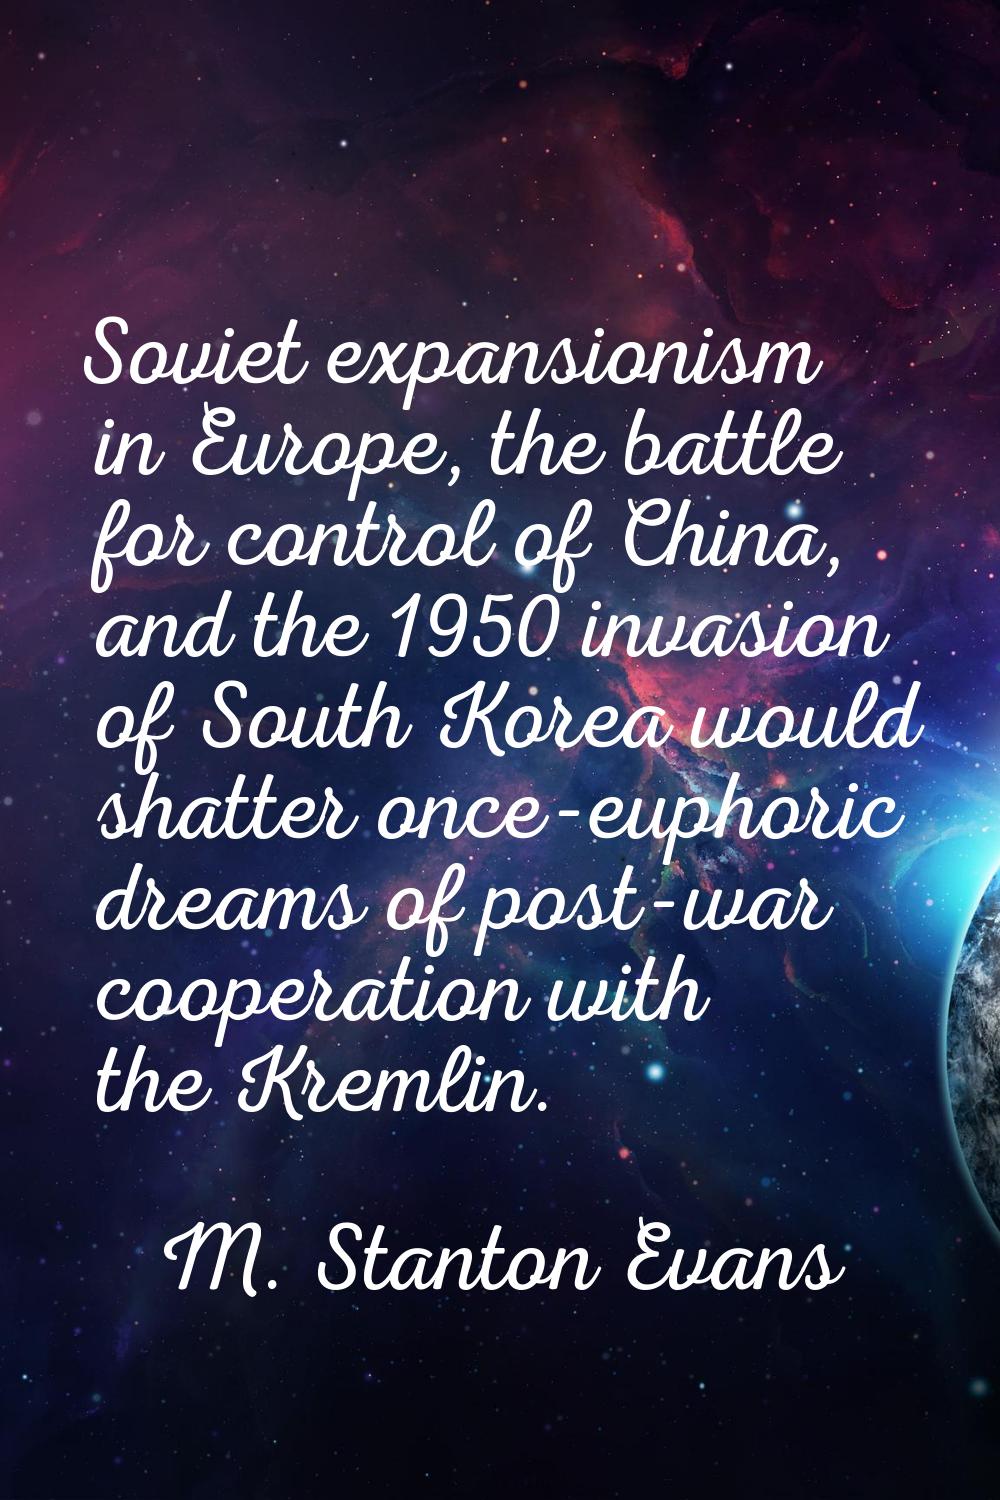 Soviet expansionism in Europe, the battle for control of China, and the 1950 invasion of South Kore